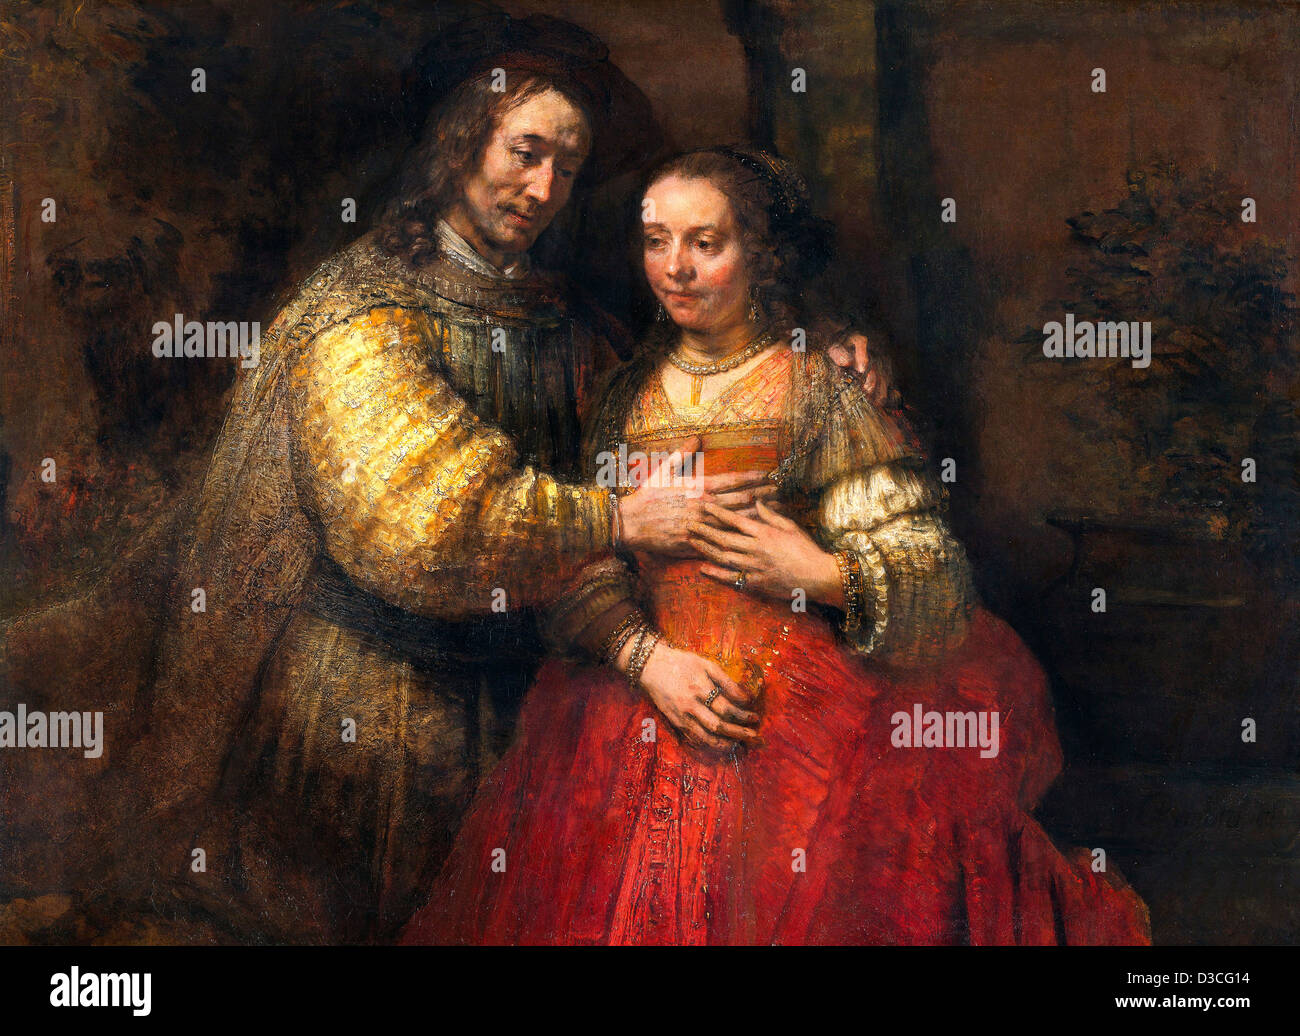 Rembrandt van Rijn Portrait of a Couple as Figures from the Old Testament (The Jewish bride). oil on canvas. circa 1665-1669 Stock Photo